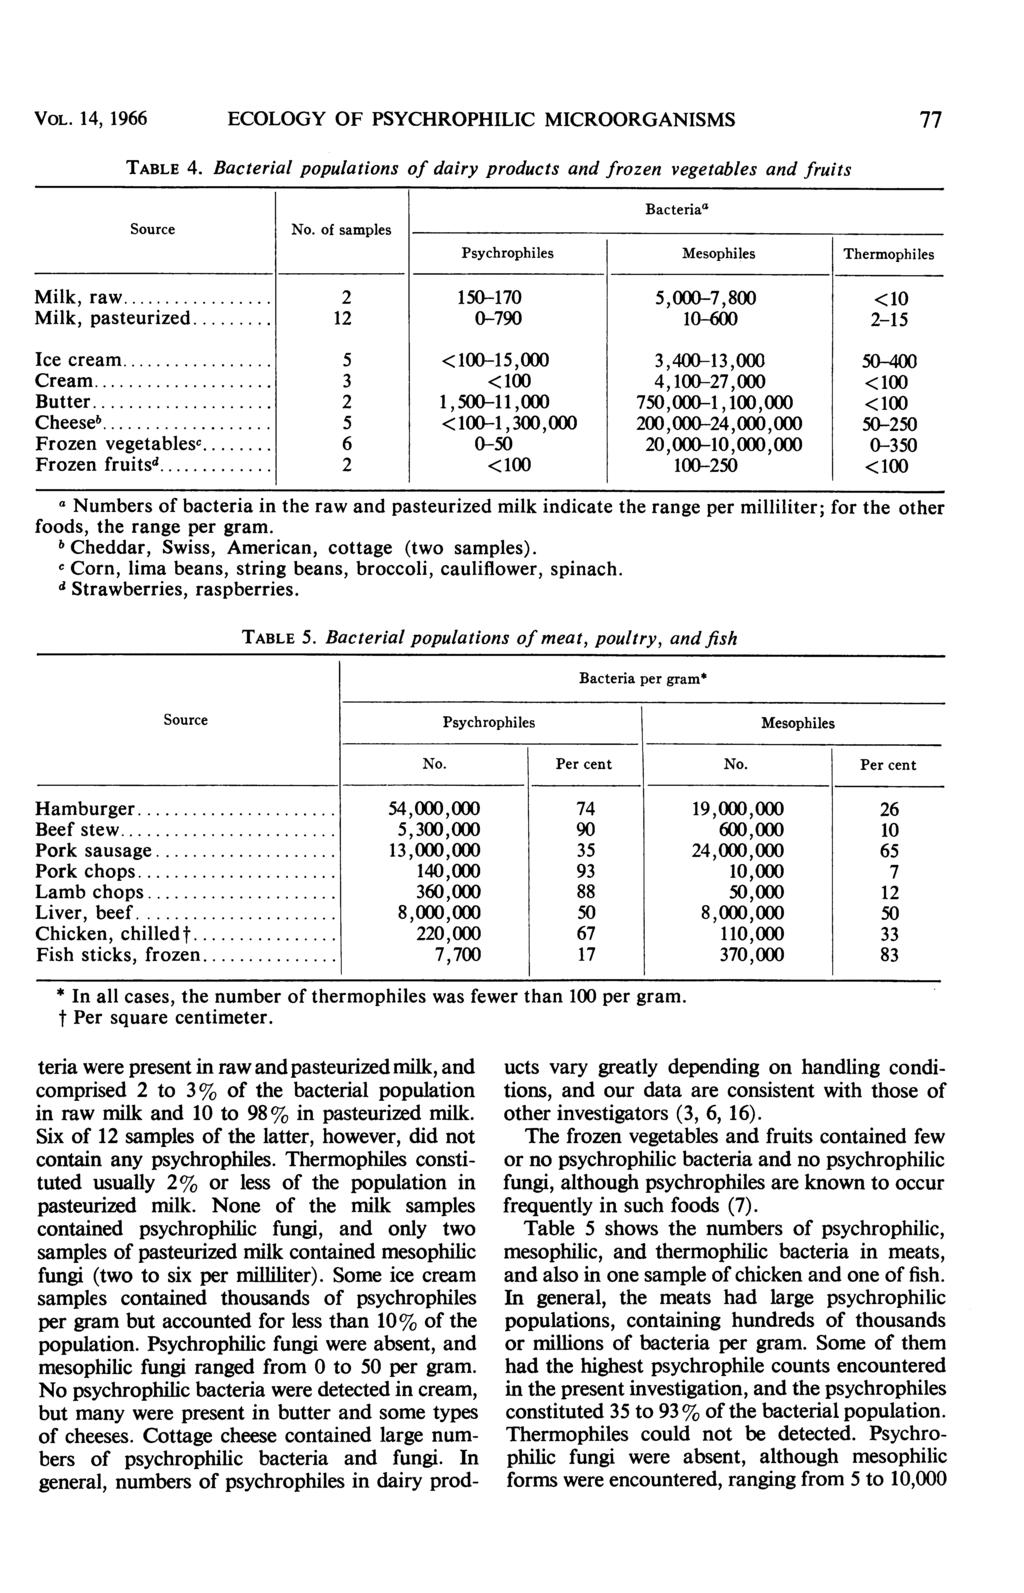 VOL. 14, 1966 ECOLOGY OF PSYCHROPHILIC MICROORGANISMS 77 TABLE 4. l populations of dairy products and frozen vegetables and fruits No. of samples a Psychrophiles Mesophiles Thermophiles Milk,raw.